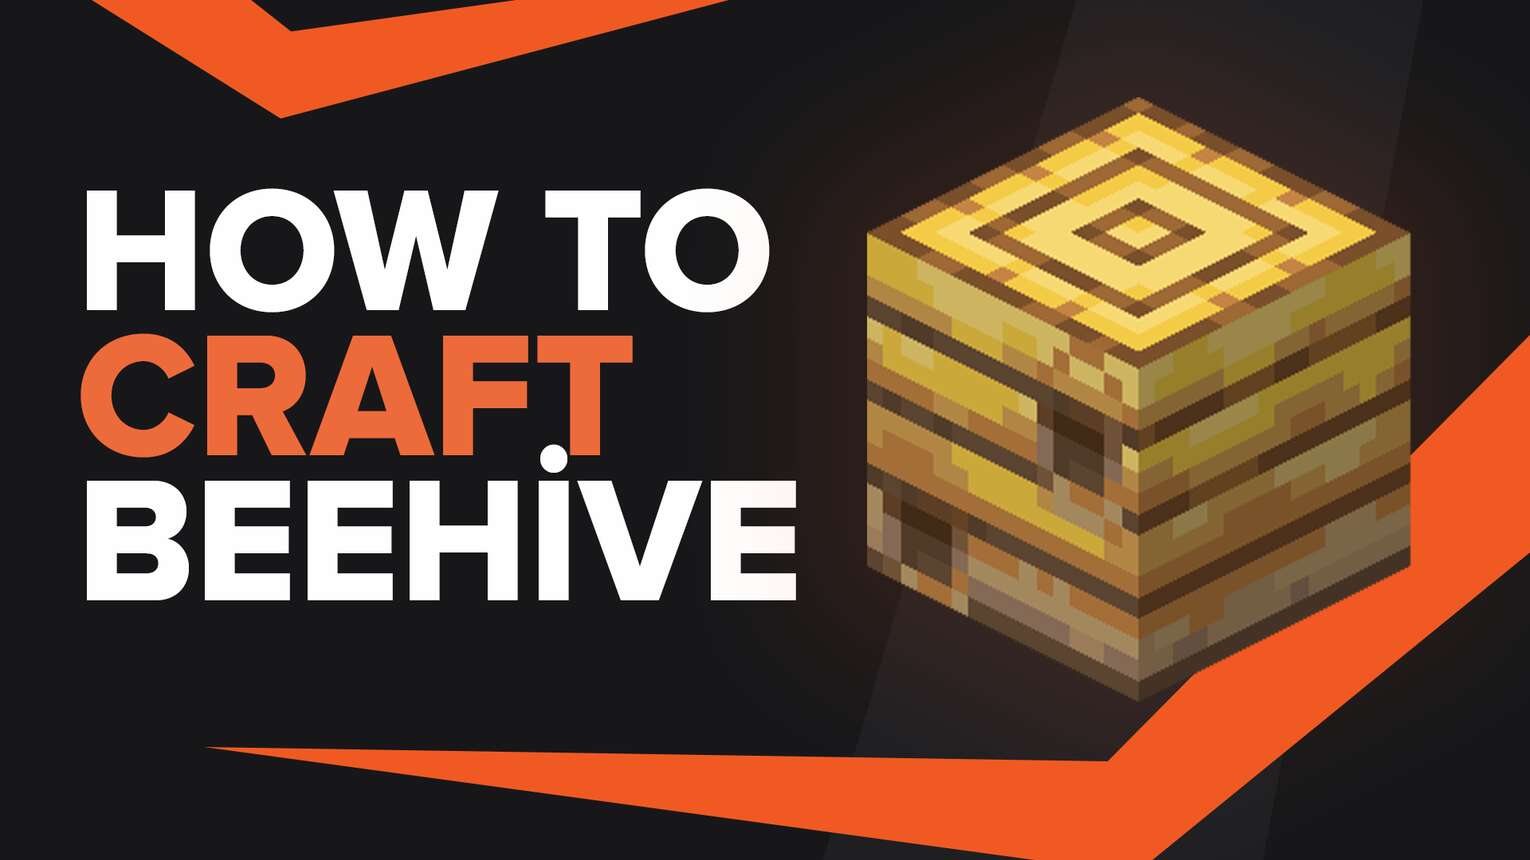 How To Make Beehive In Minecraft